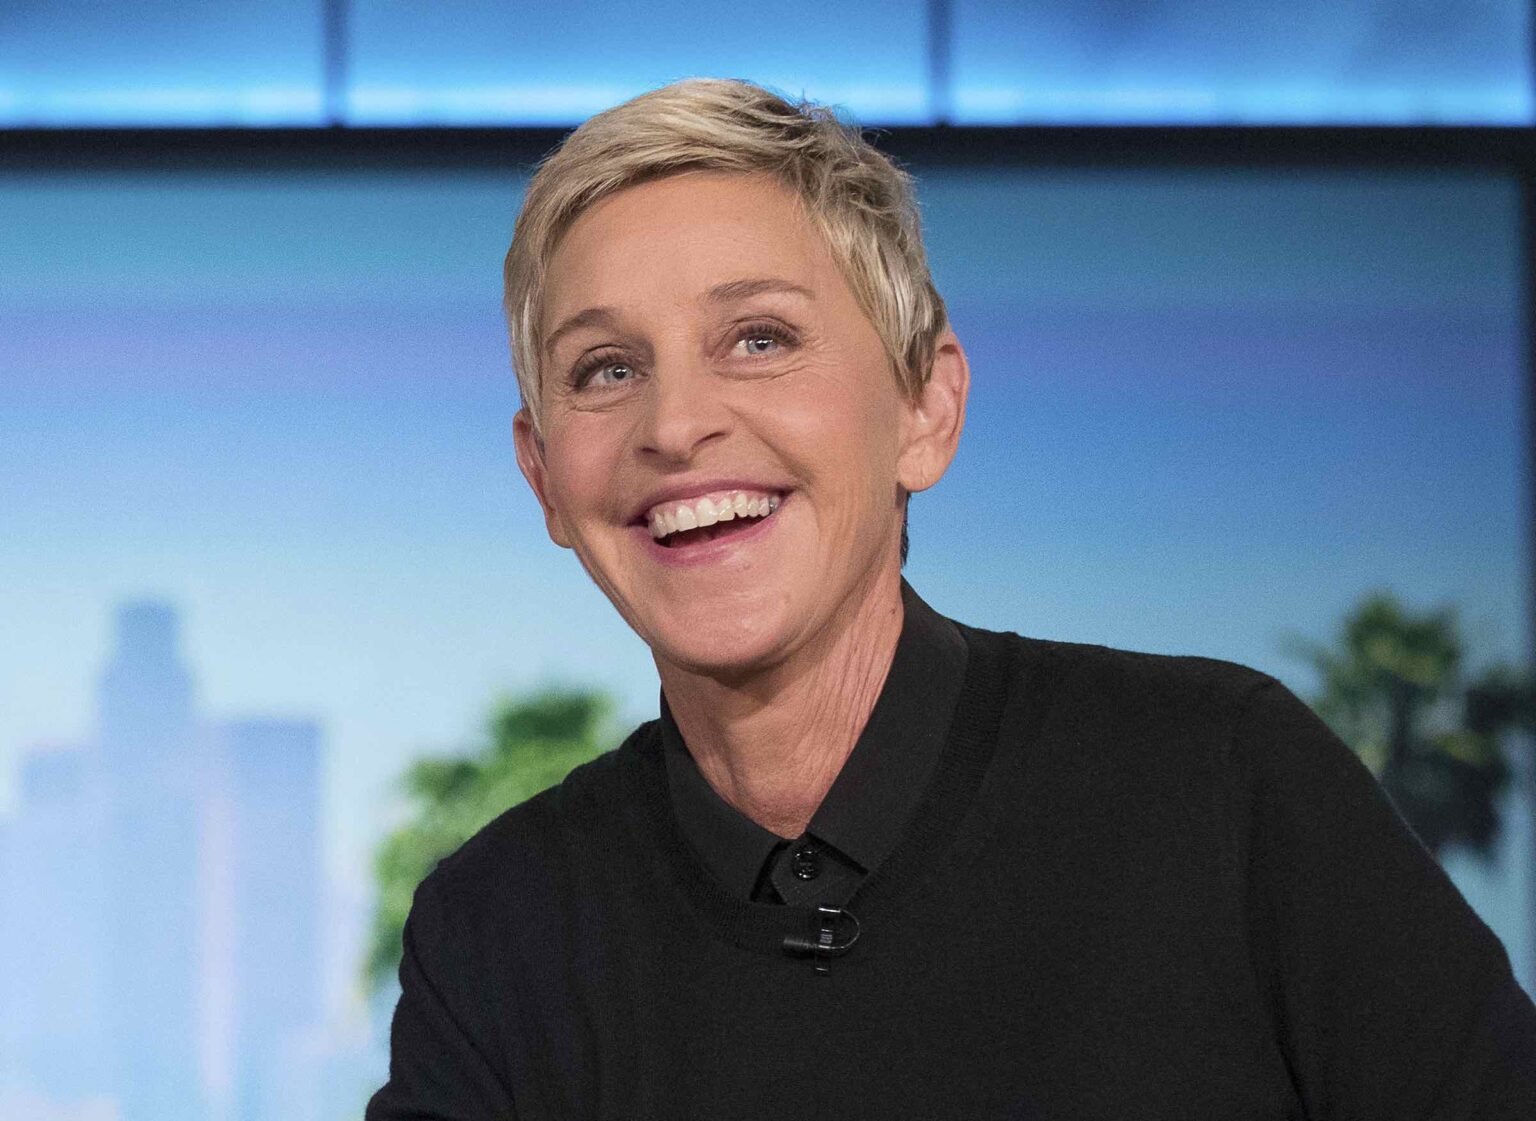 Warner Bros. has had quite a summer full of allegations involving 'The Ellen DeGeneres Show'. Here's what they have to say.